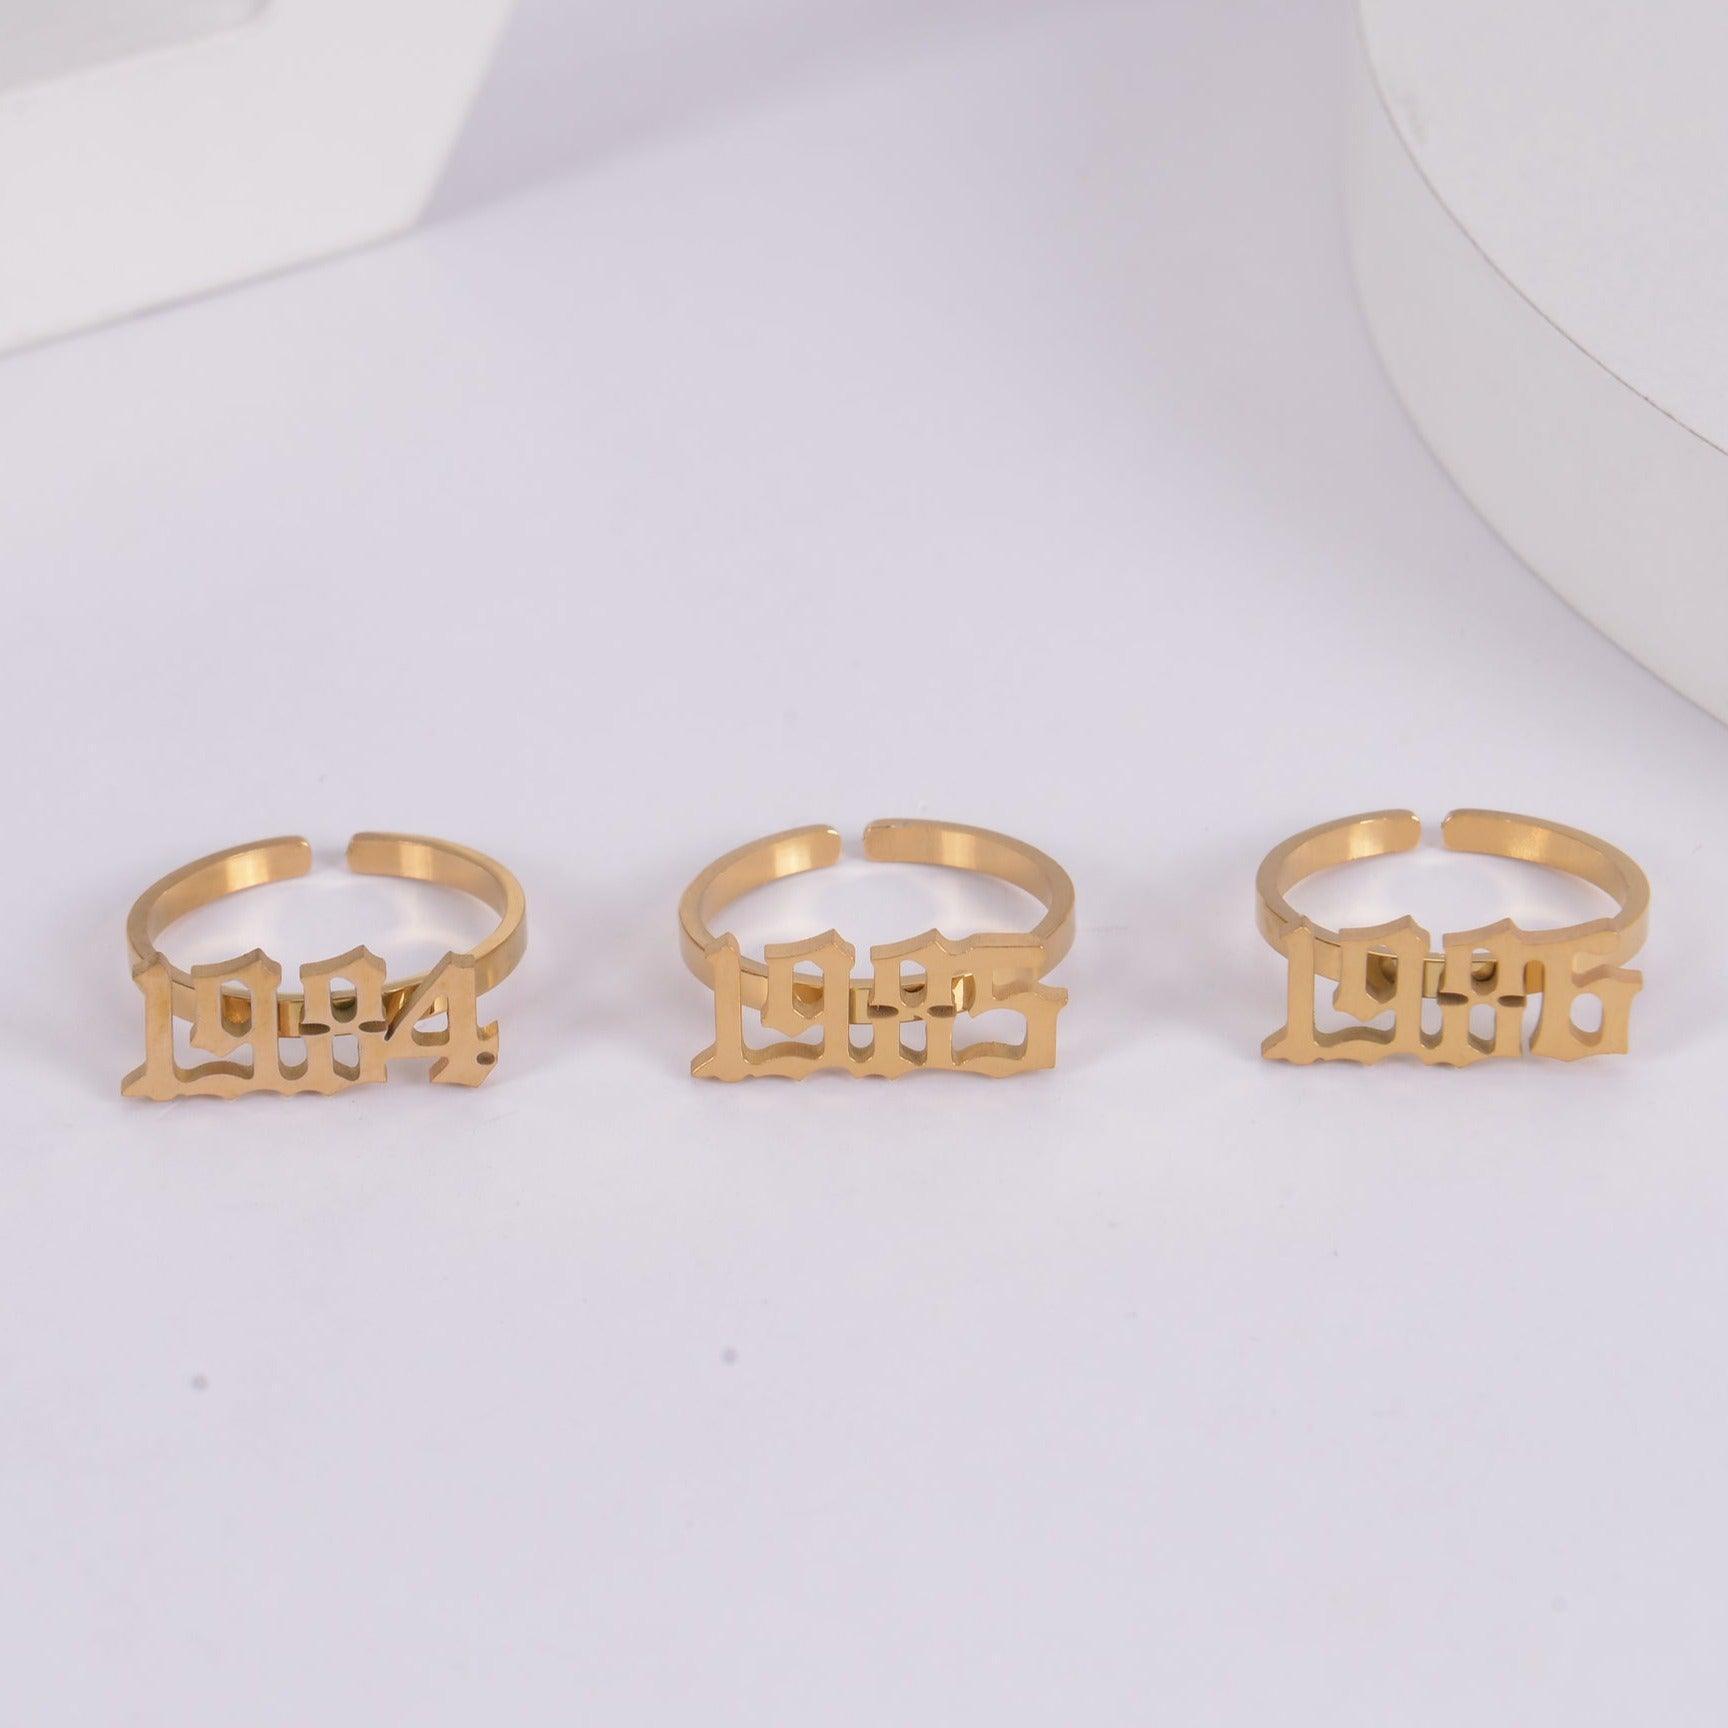 BIRTH YEAR RING – THE STYLE UNION